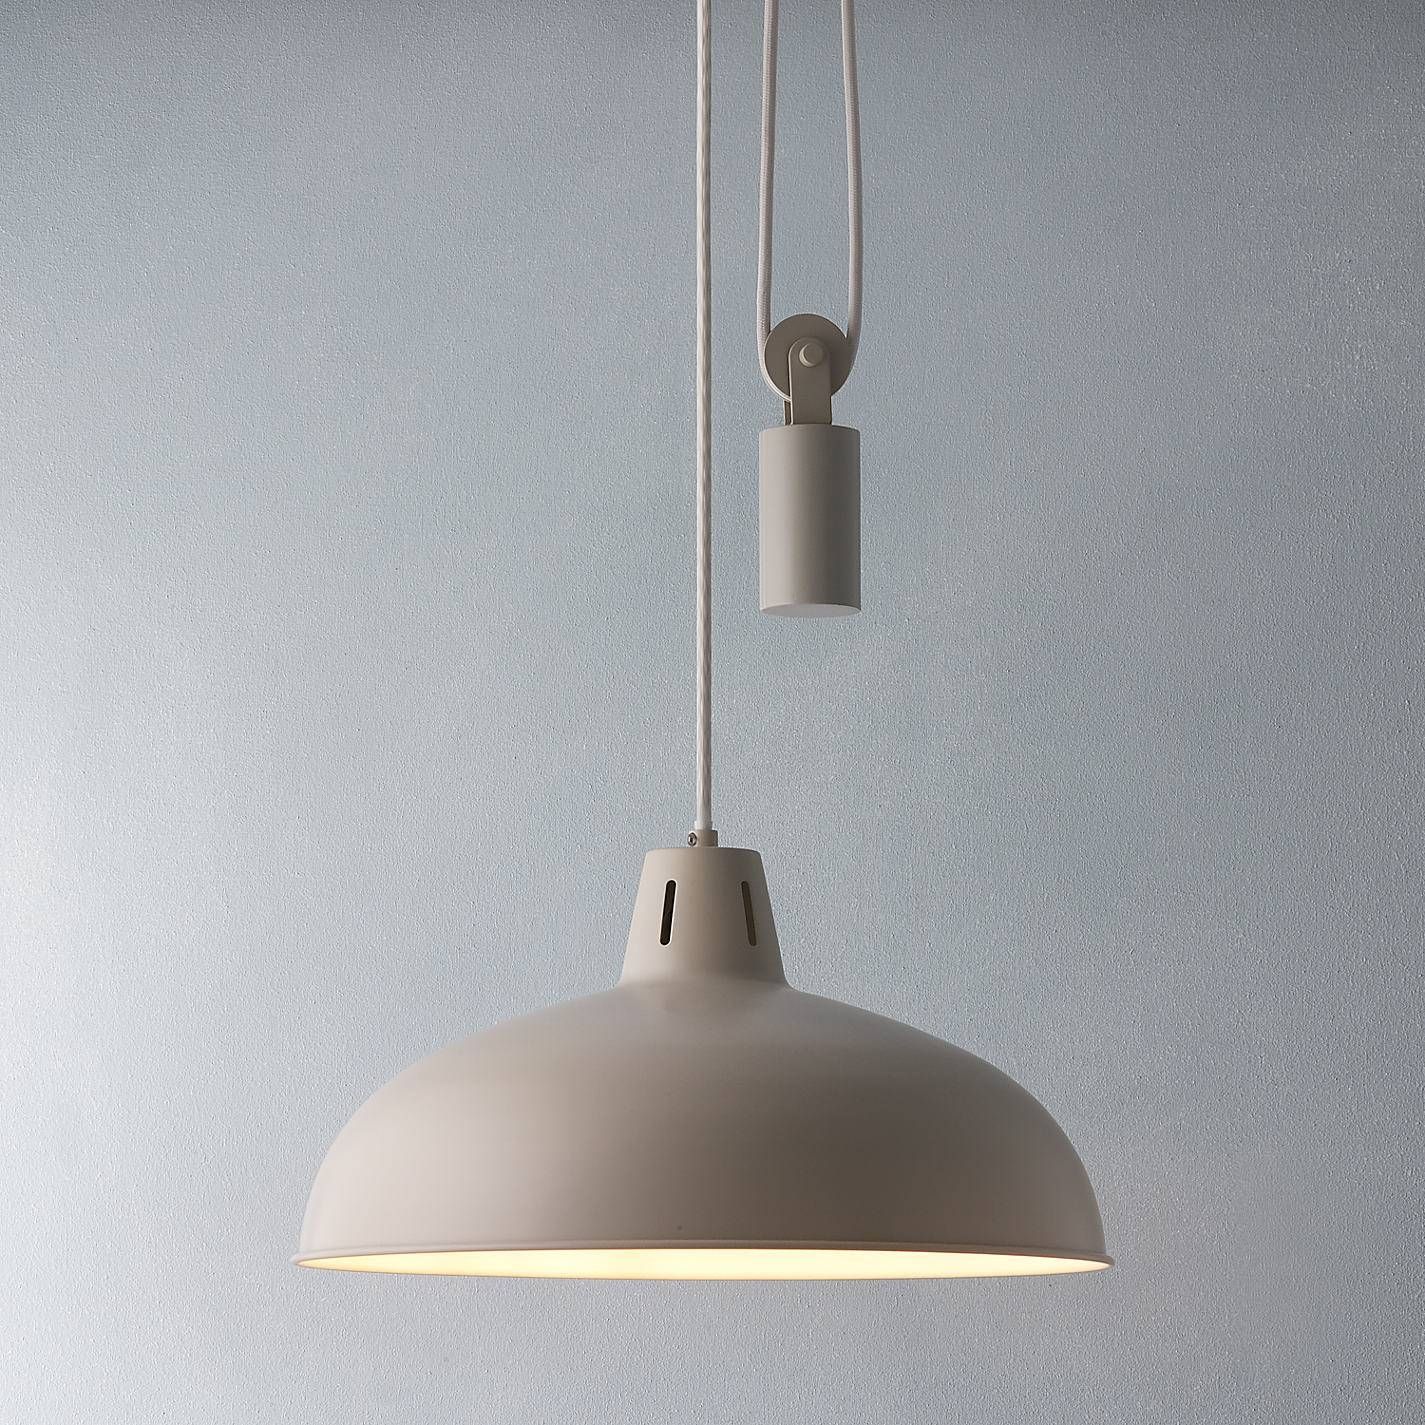 Awesome Adjustable Pendant Light 49 In George Kovacs Pendant In Rise And Fall Pendant Lighting (View 11 of 15)